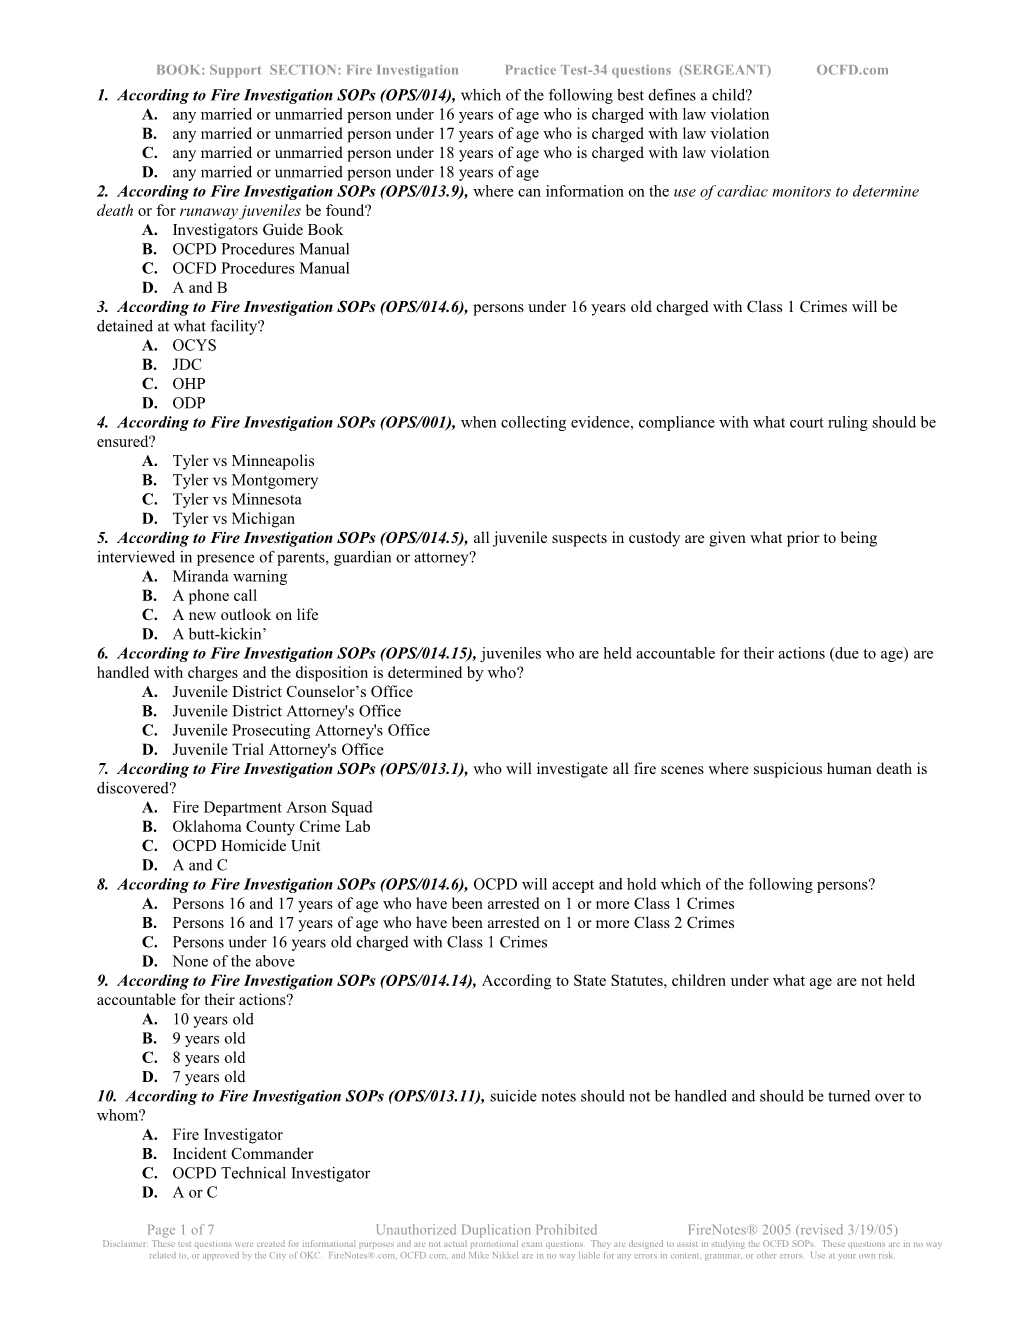 BOOK: Support SECTION: Fire Investigation Practice Test-34 Questions (SERGEANT) OCFD.Com